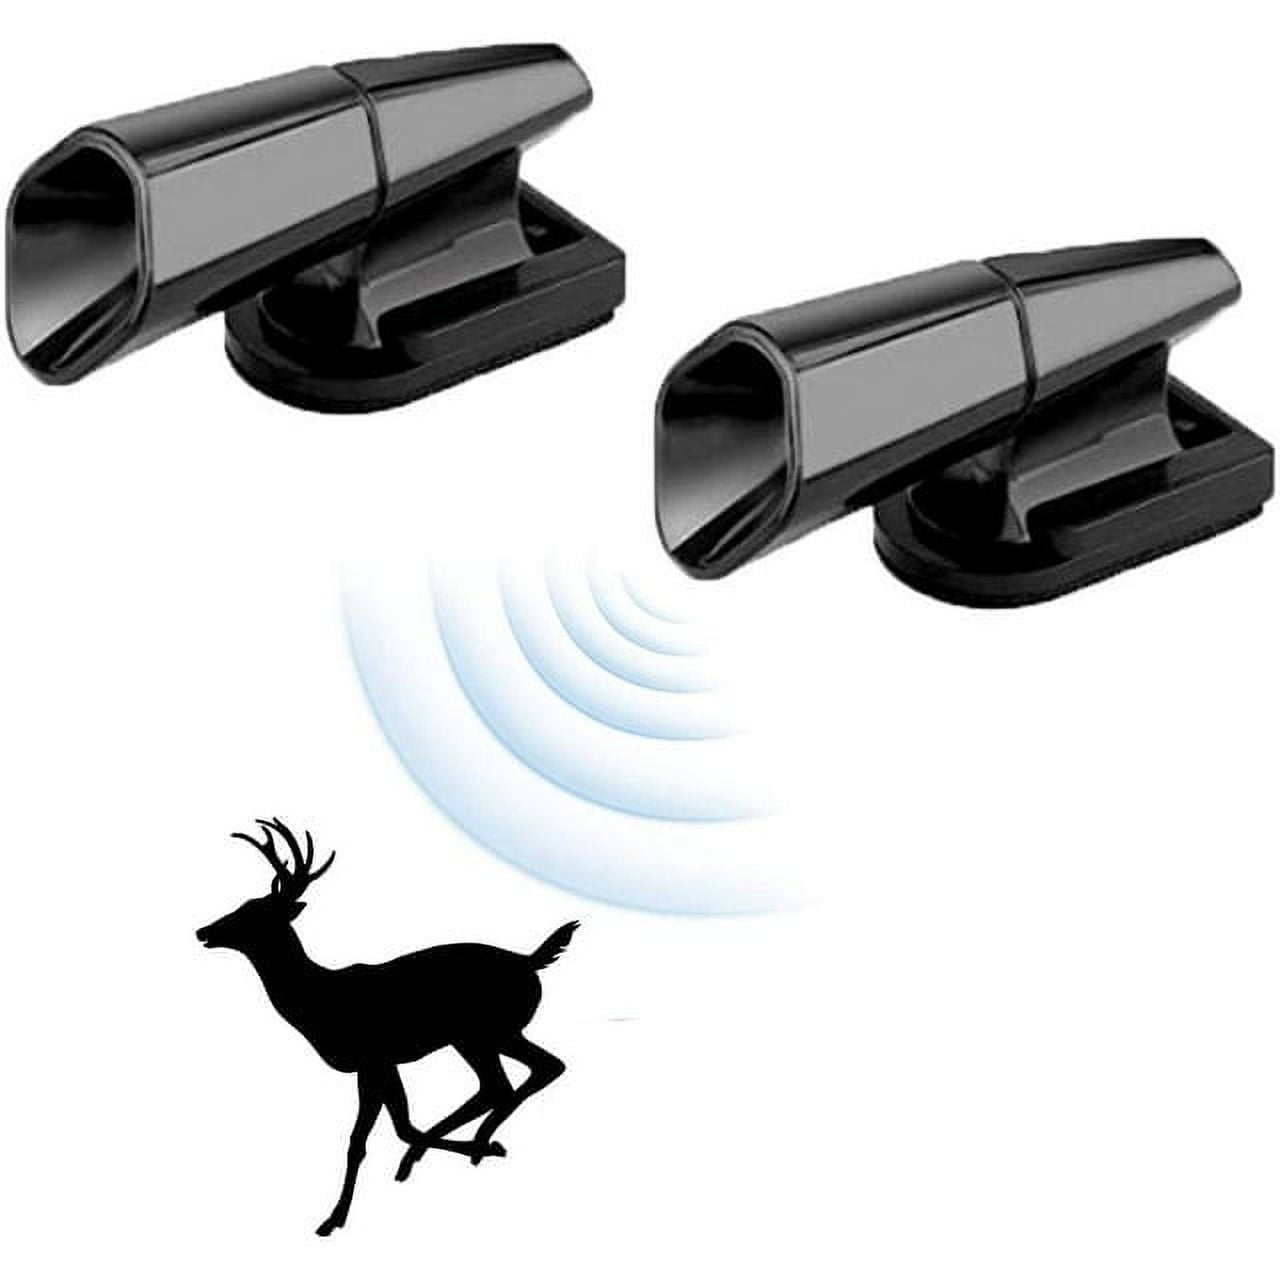 Deer Whistles for Vehicles - Car Deer Warning Whistle Devices,Dual  Construction Deer Animal Alert Horn Devices with Adhesive Tapes for Truck  and Motorcycle 